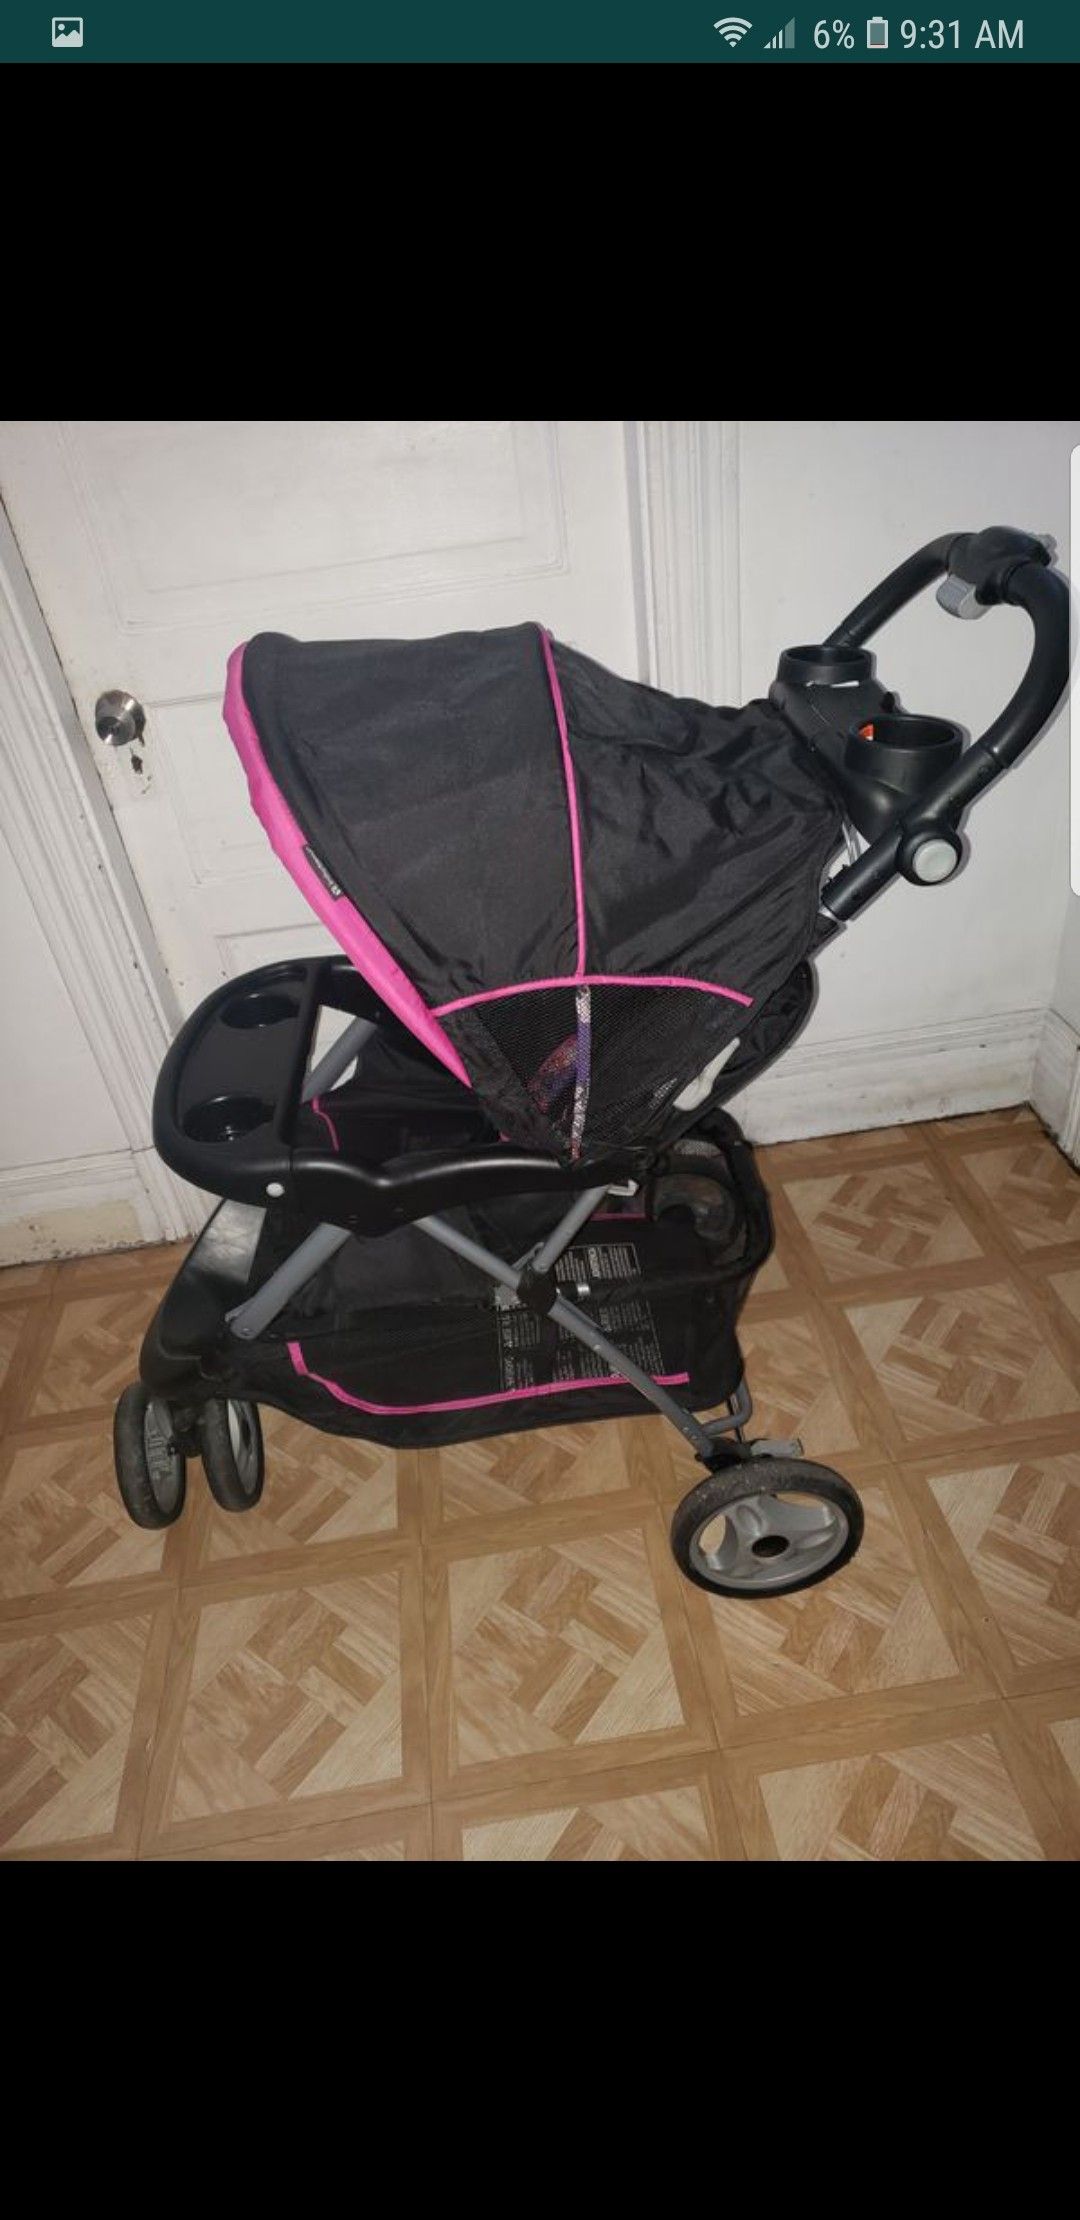 Carseat and stroller